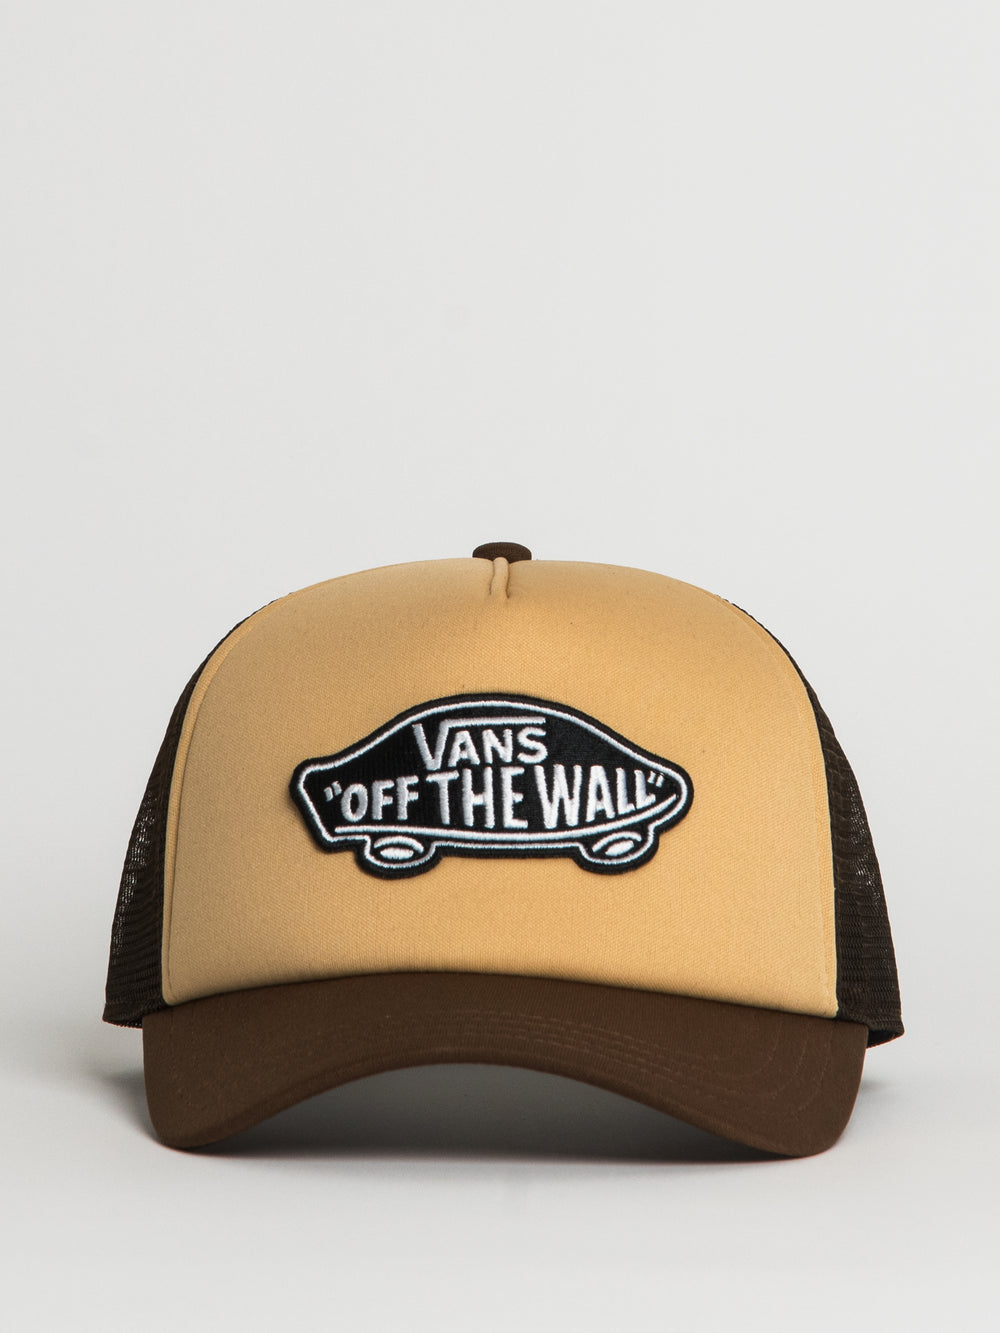 BILL HAT PATCH Footwear TRUCKER CLASSIC Collective VANS | Boathouse CURVED